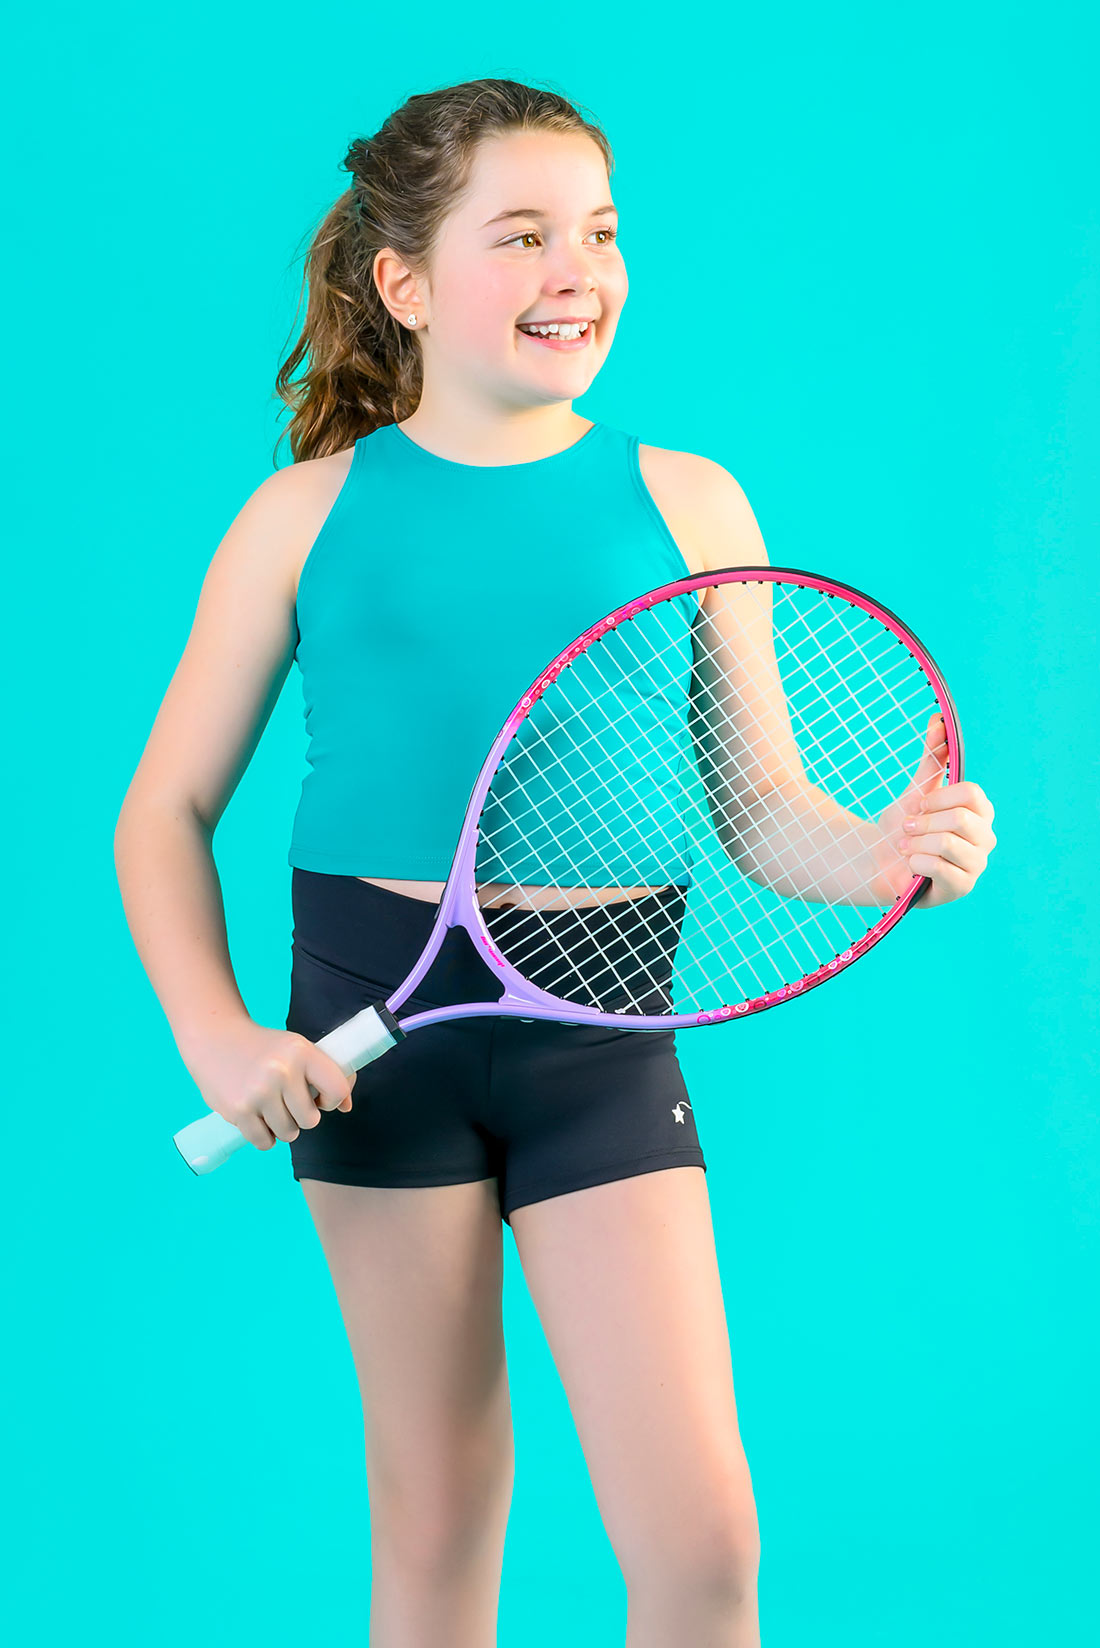 Turquoise and black tennis outfit by Destira, 2024